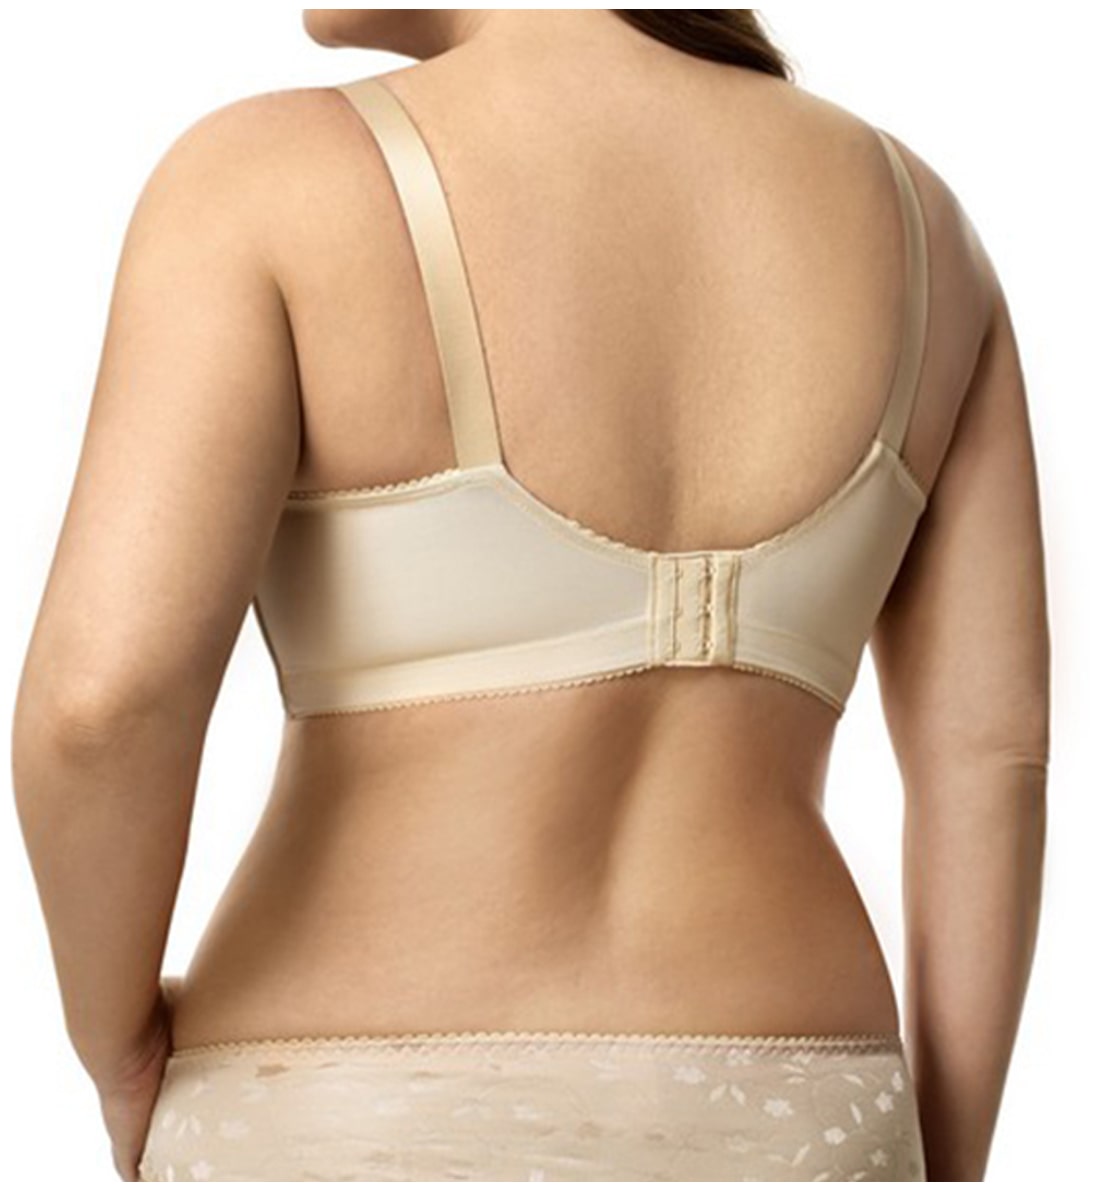 Elila Jacquard Full Support Softcup (1305),34F,Nude - Nude,34F